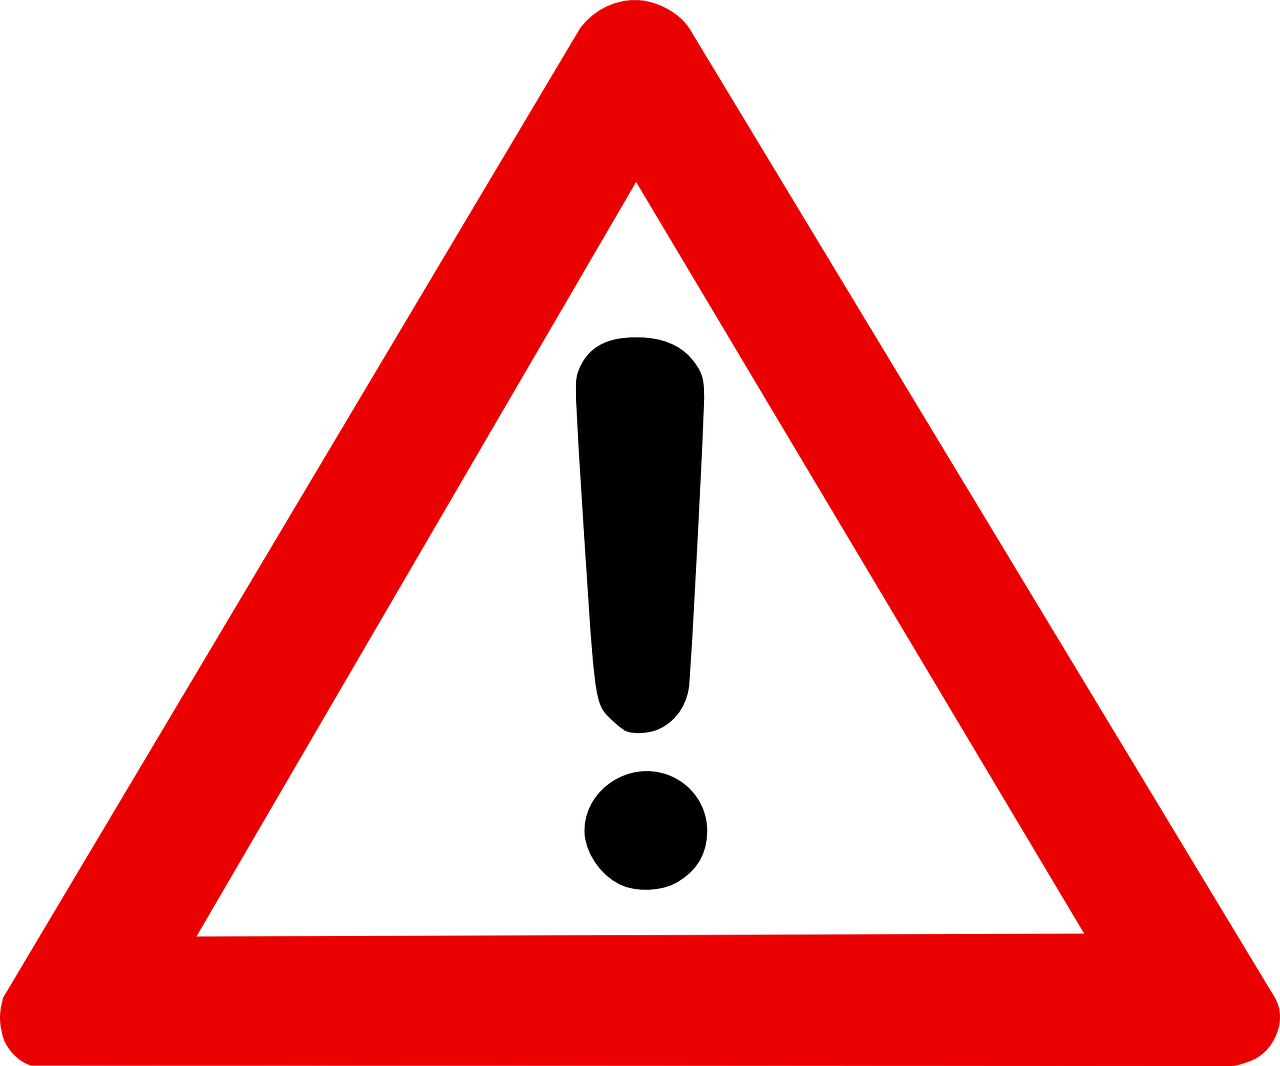 warning sign exclamation mark in red triangle alert free photo